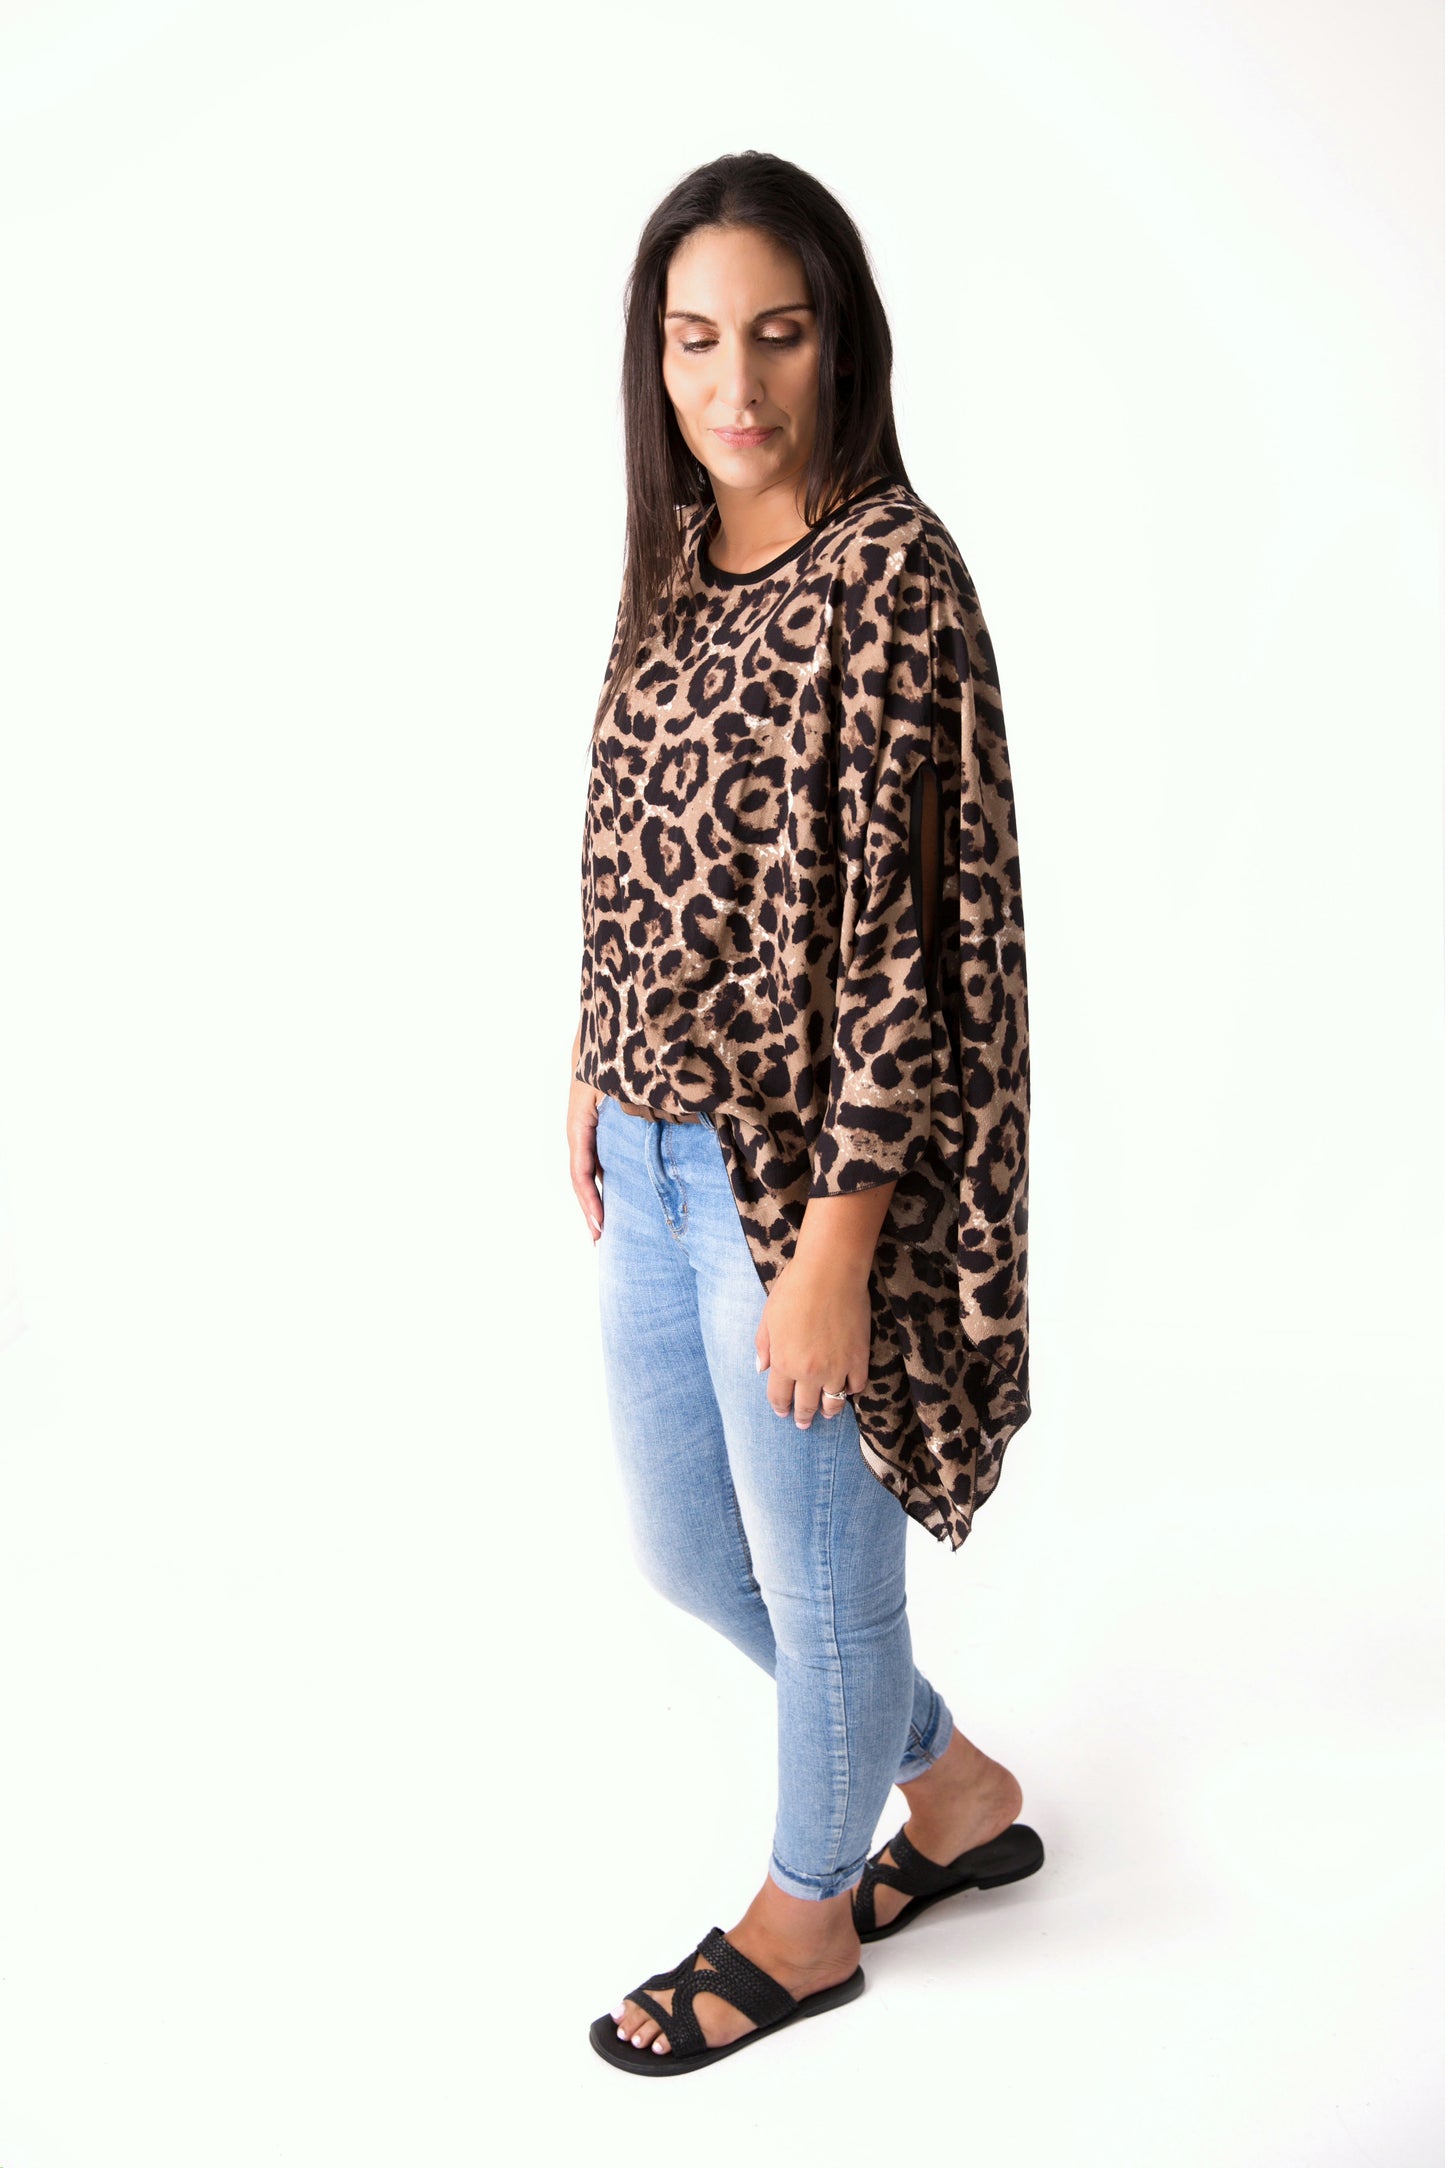 Butterfly Top - Animal Print